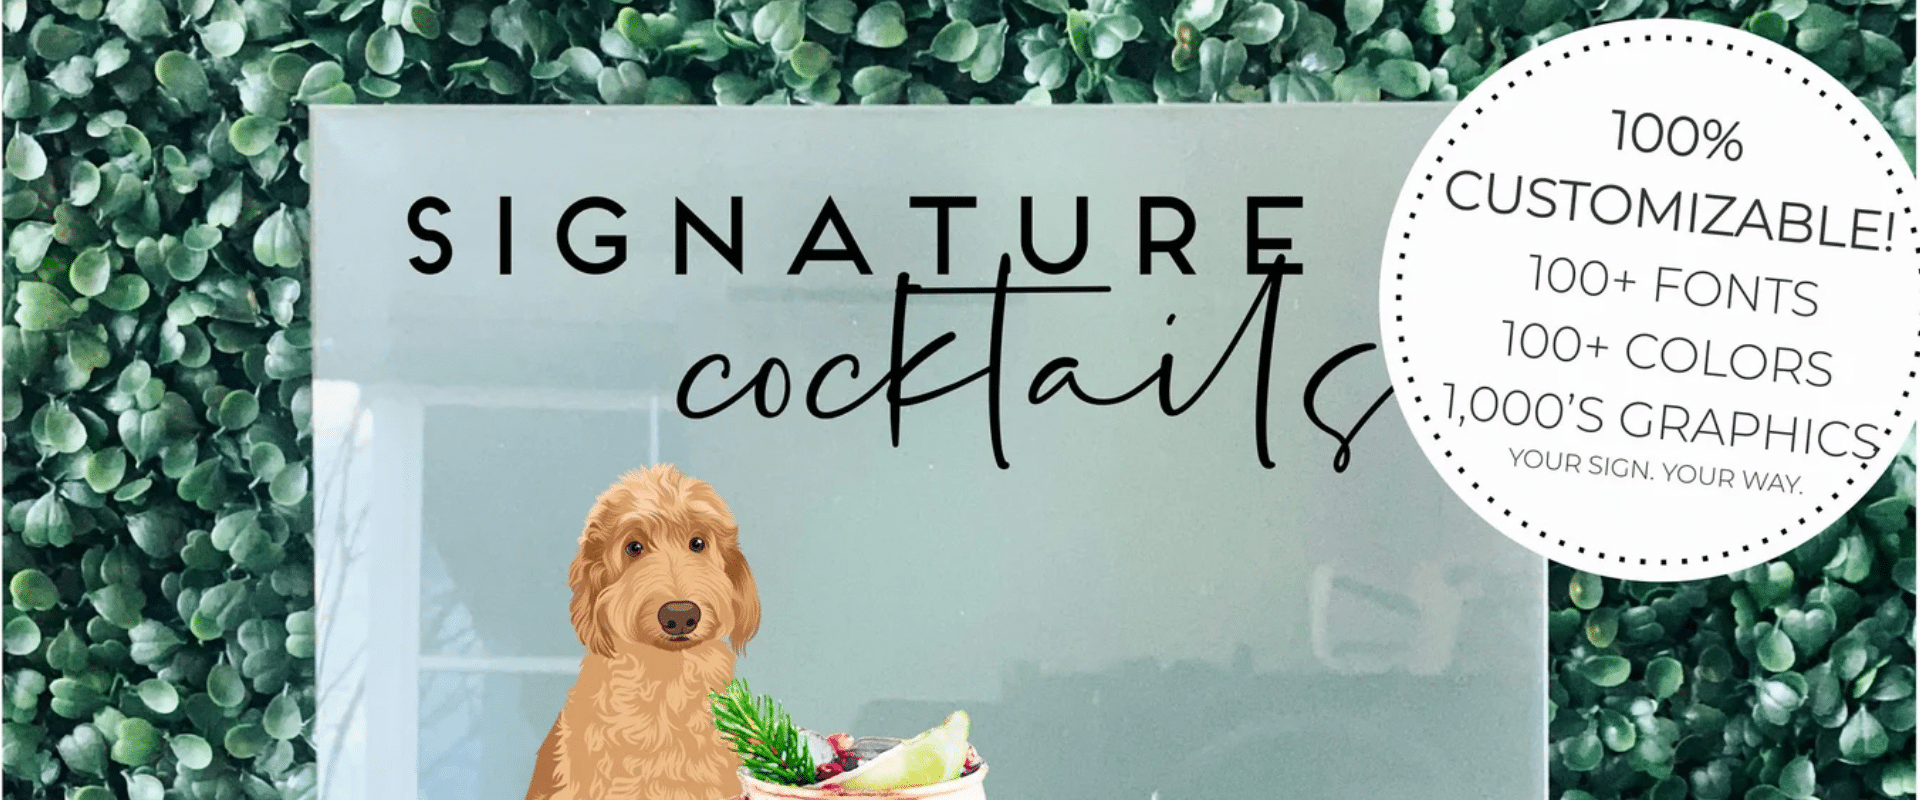 A custom acrylic sign featuring a dog and the words "signature cocktail" for a bar.